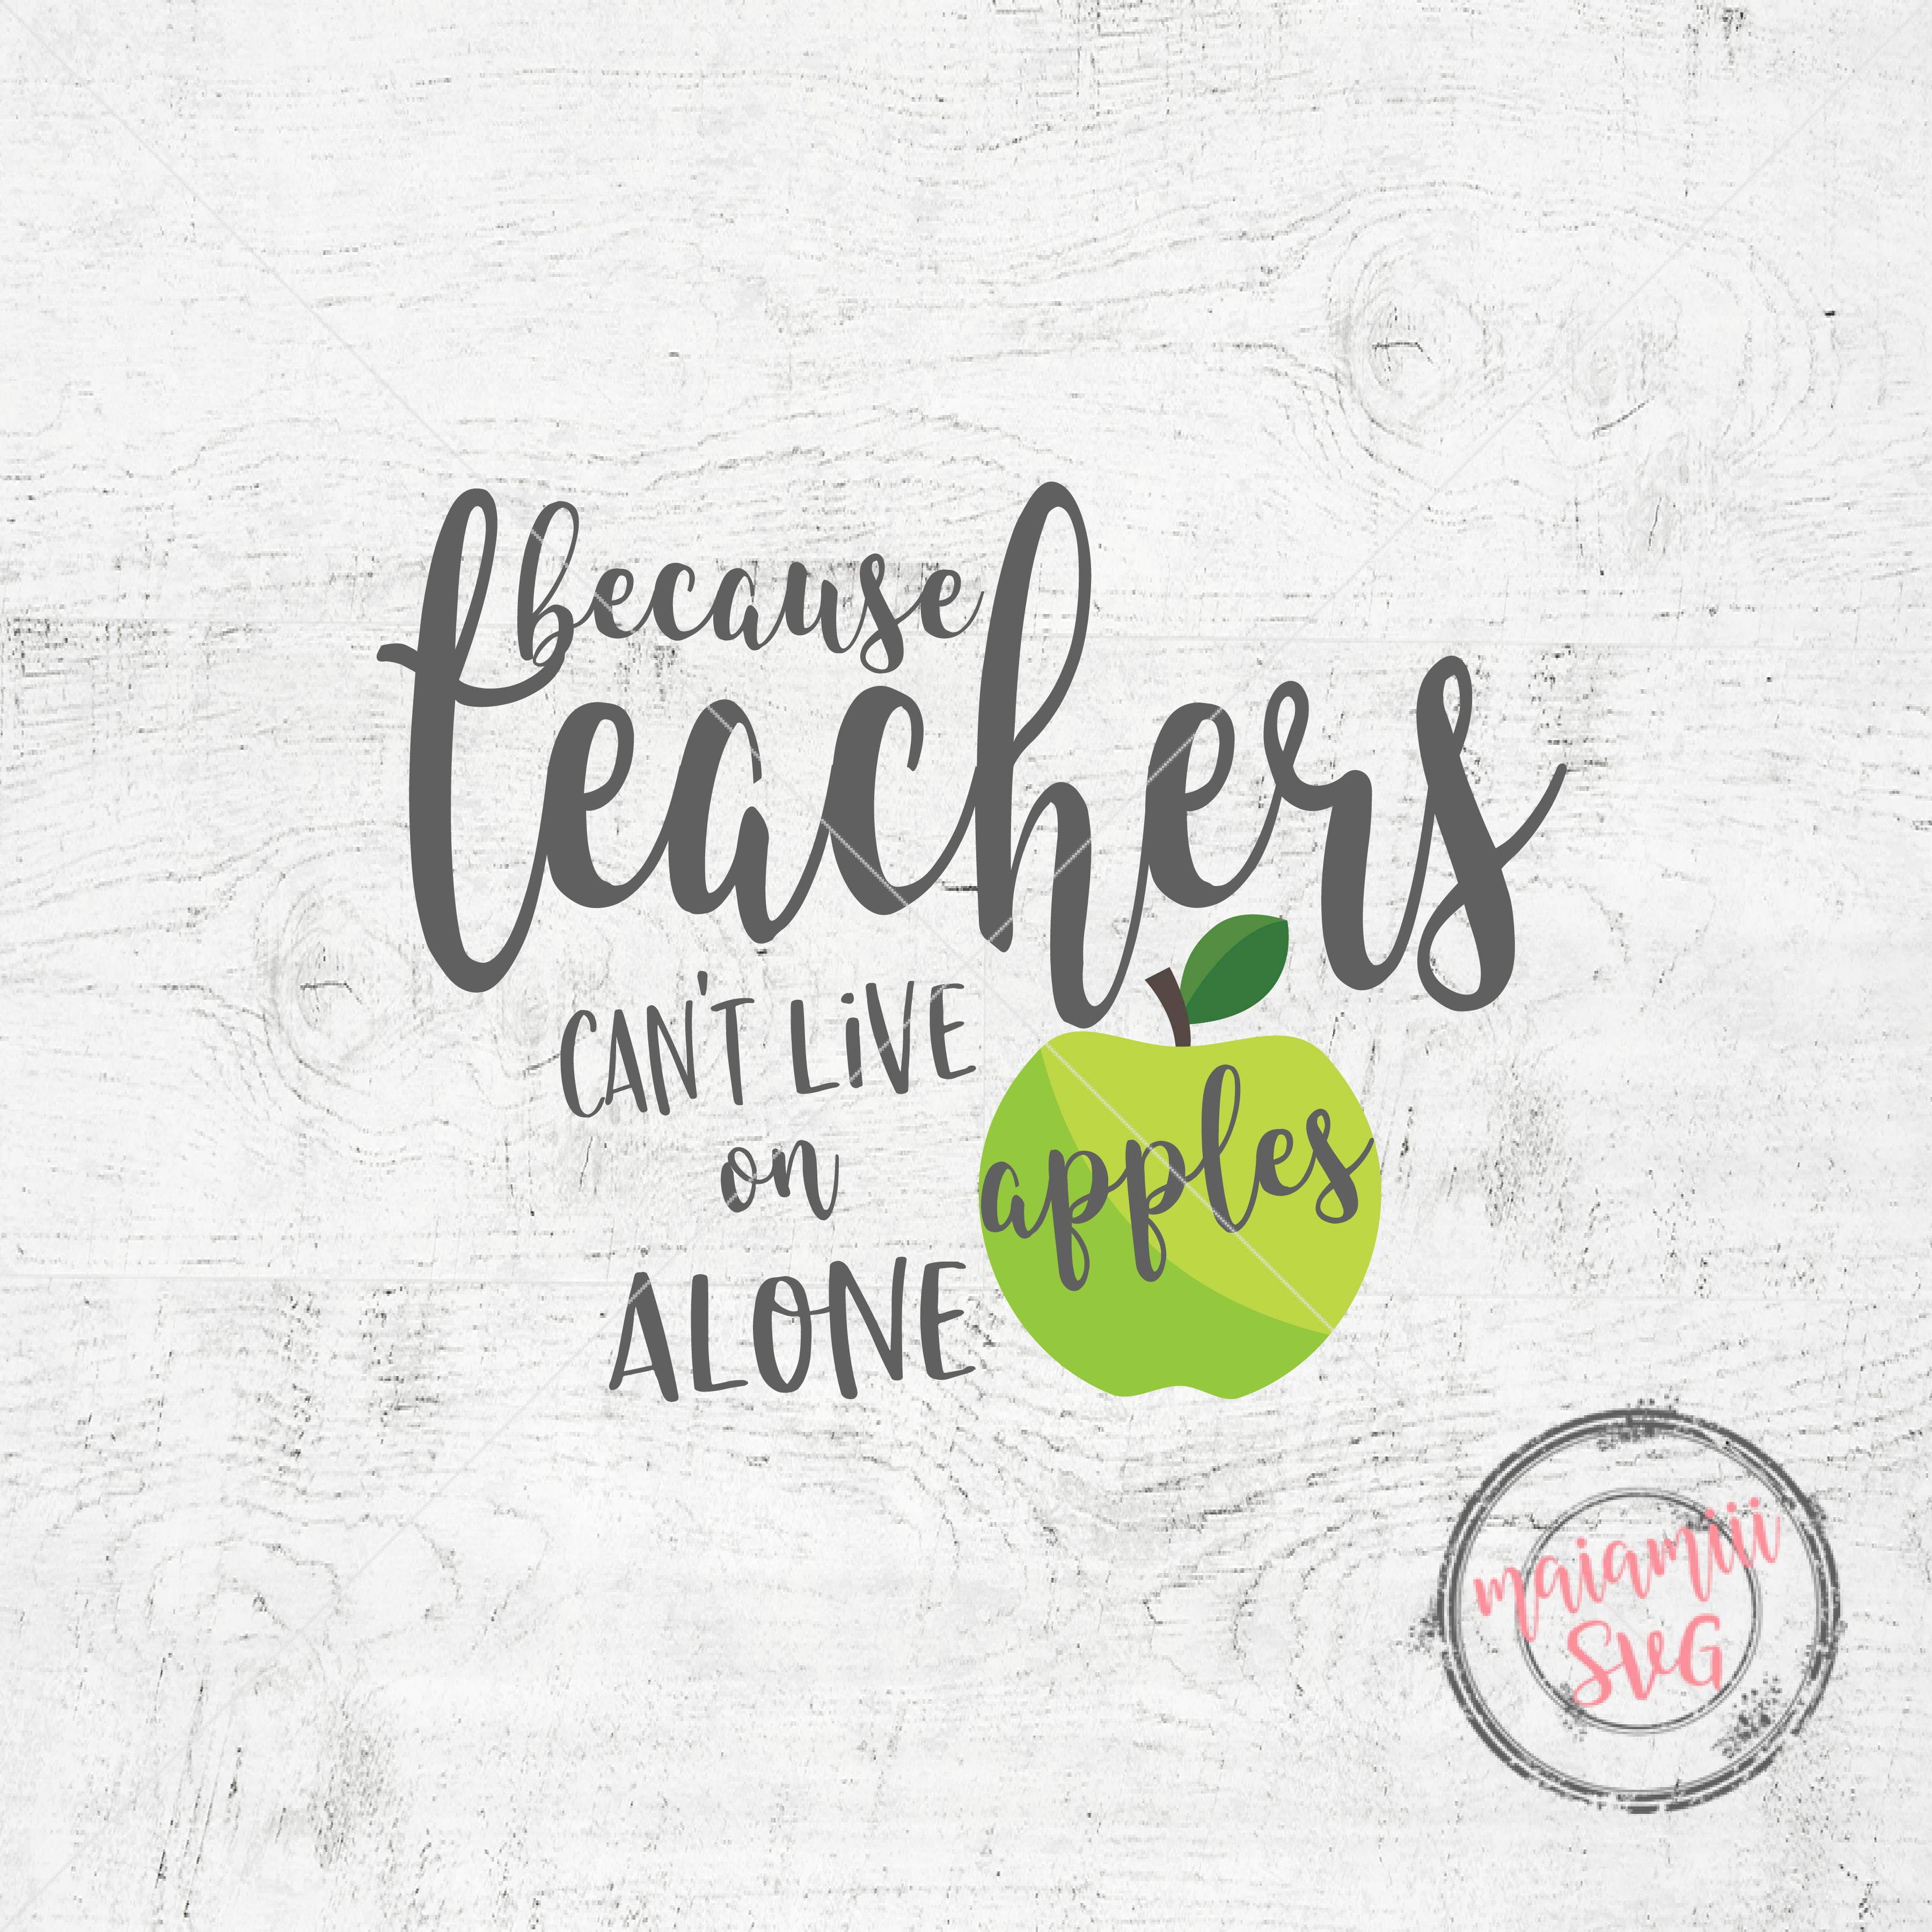 Download Because Teachers Can't Live on Apples Alone SVG Teacher ...